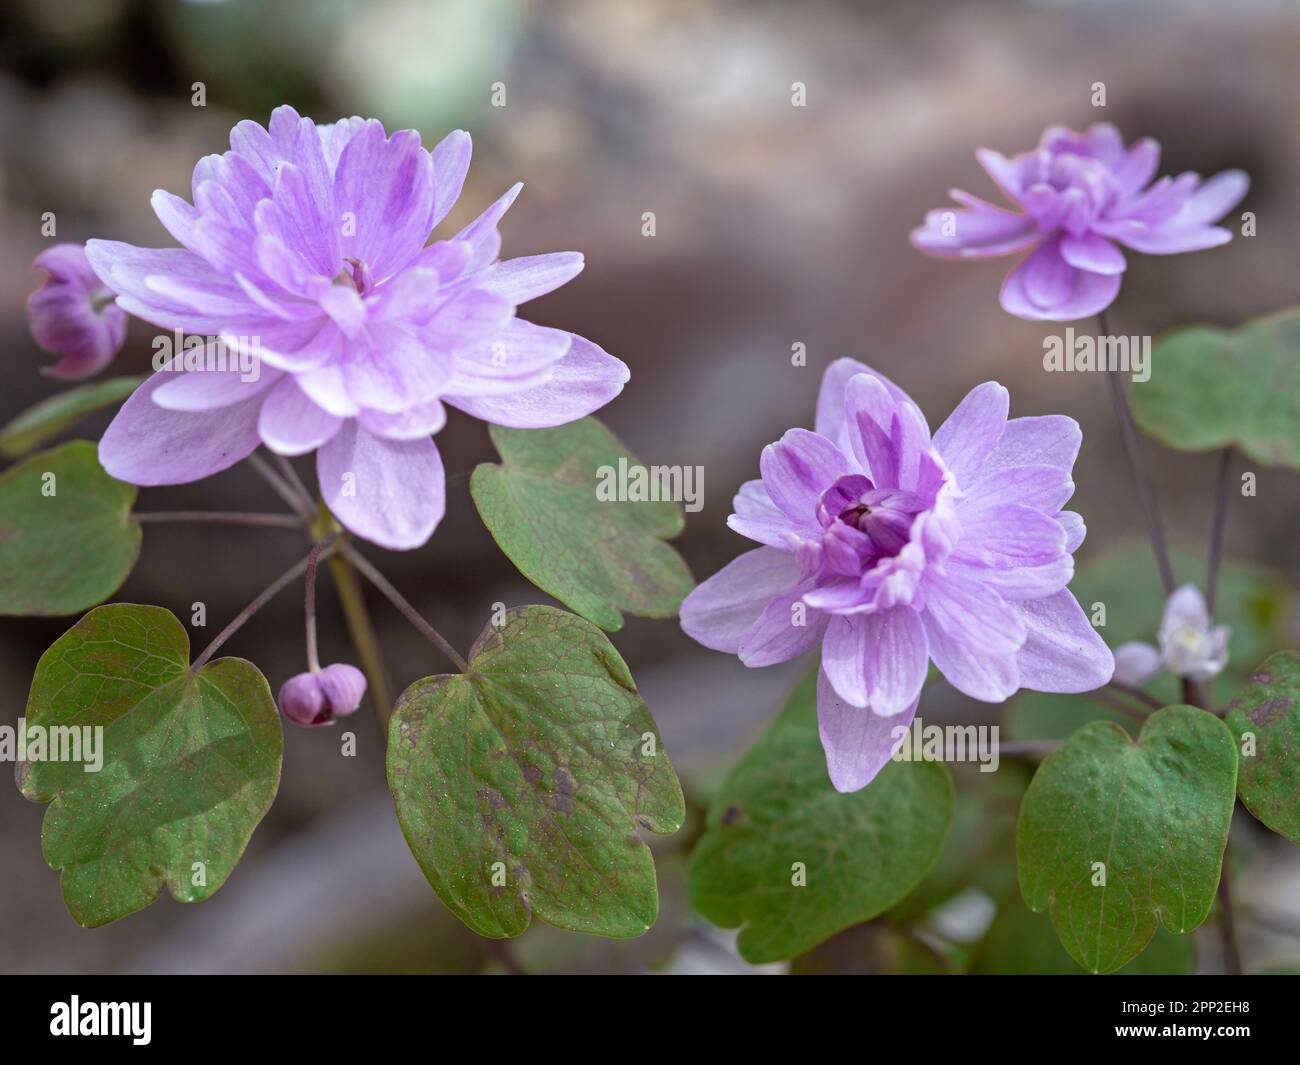 Lovely purple flowers of rue anemone Anemonella thalictroides Stock Photo